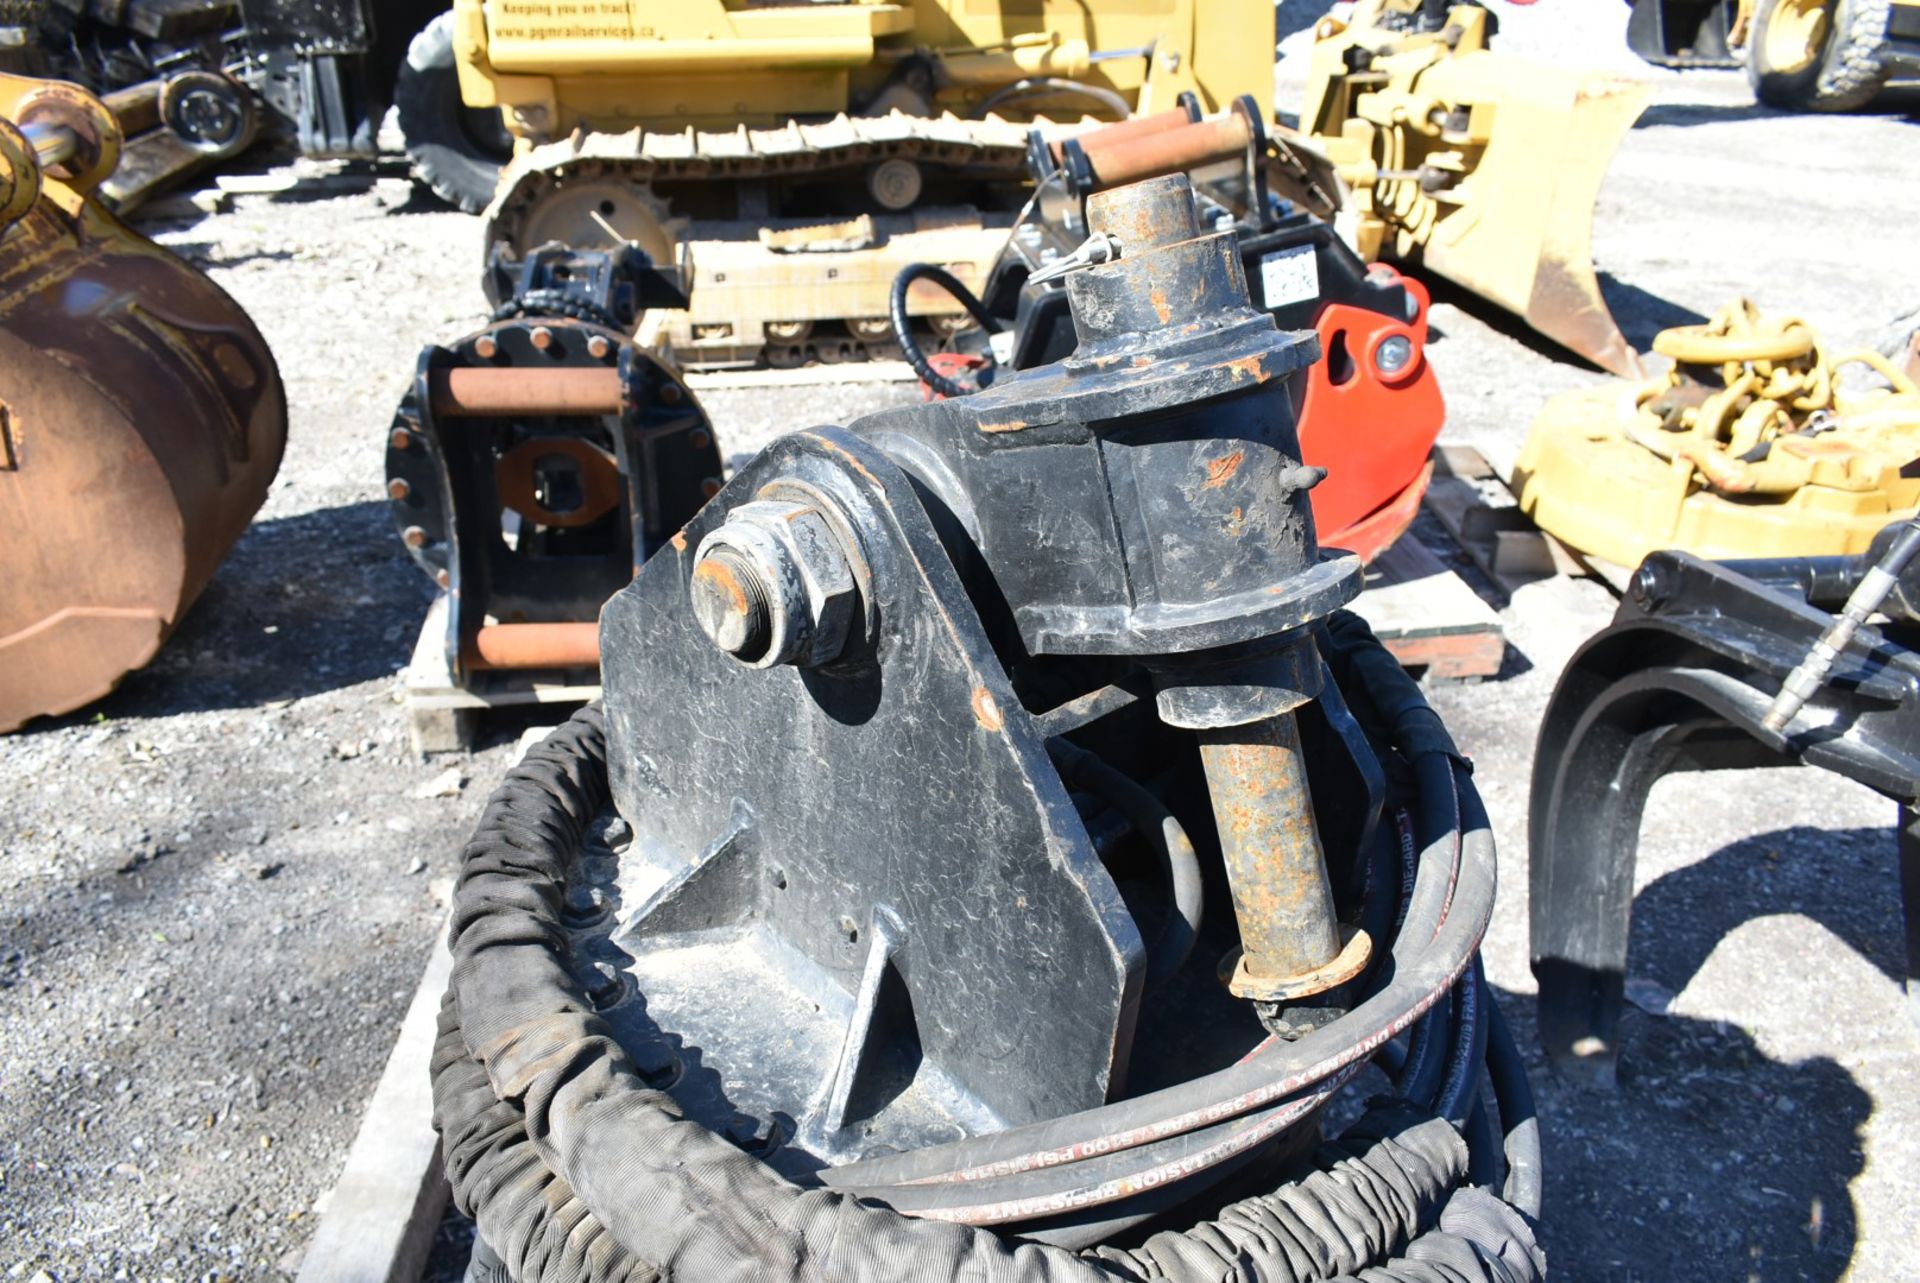 MFG N/A GRAPPLE ATTACHMENT - Image 3 of 3